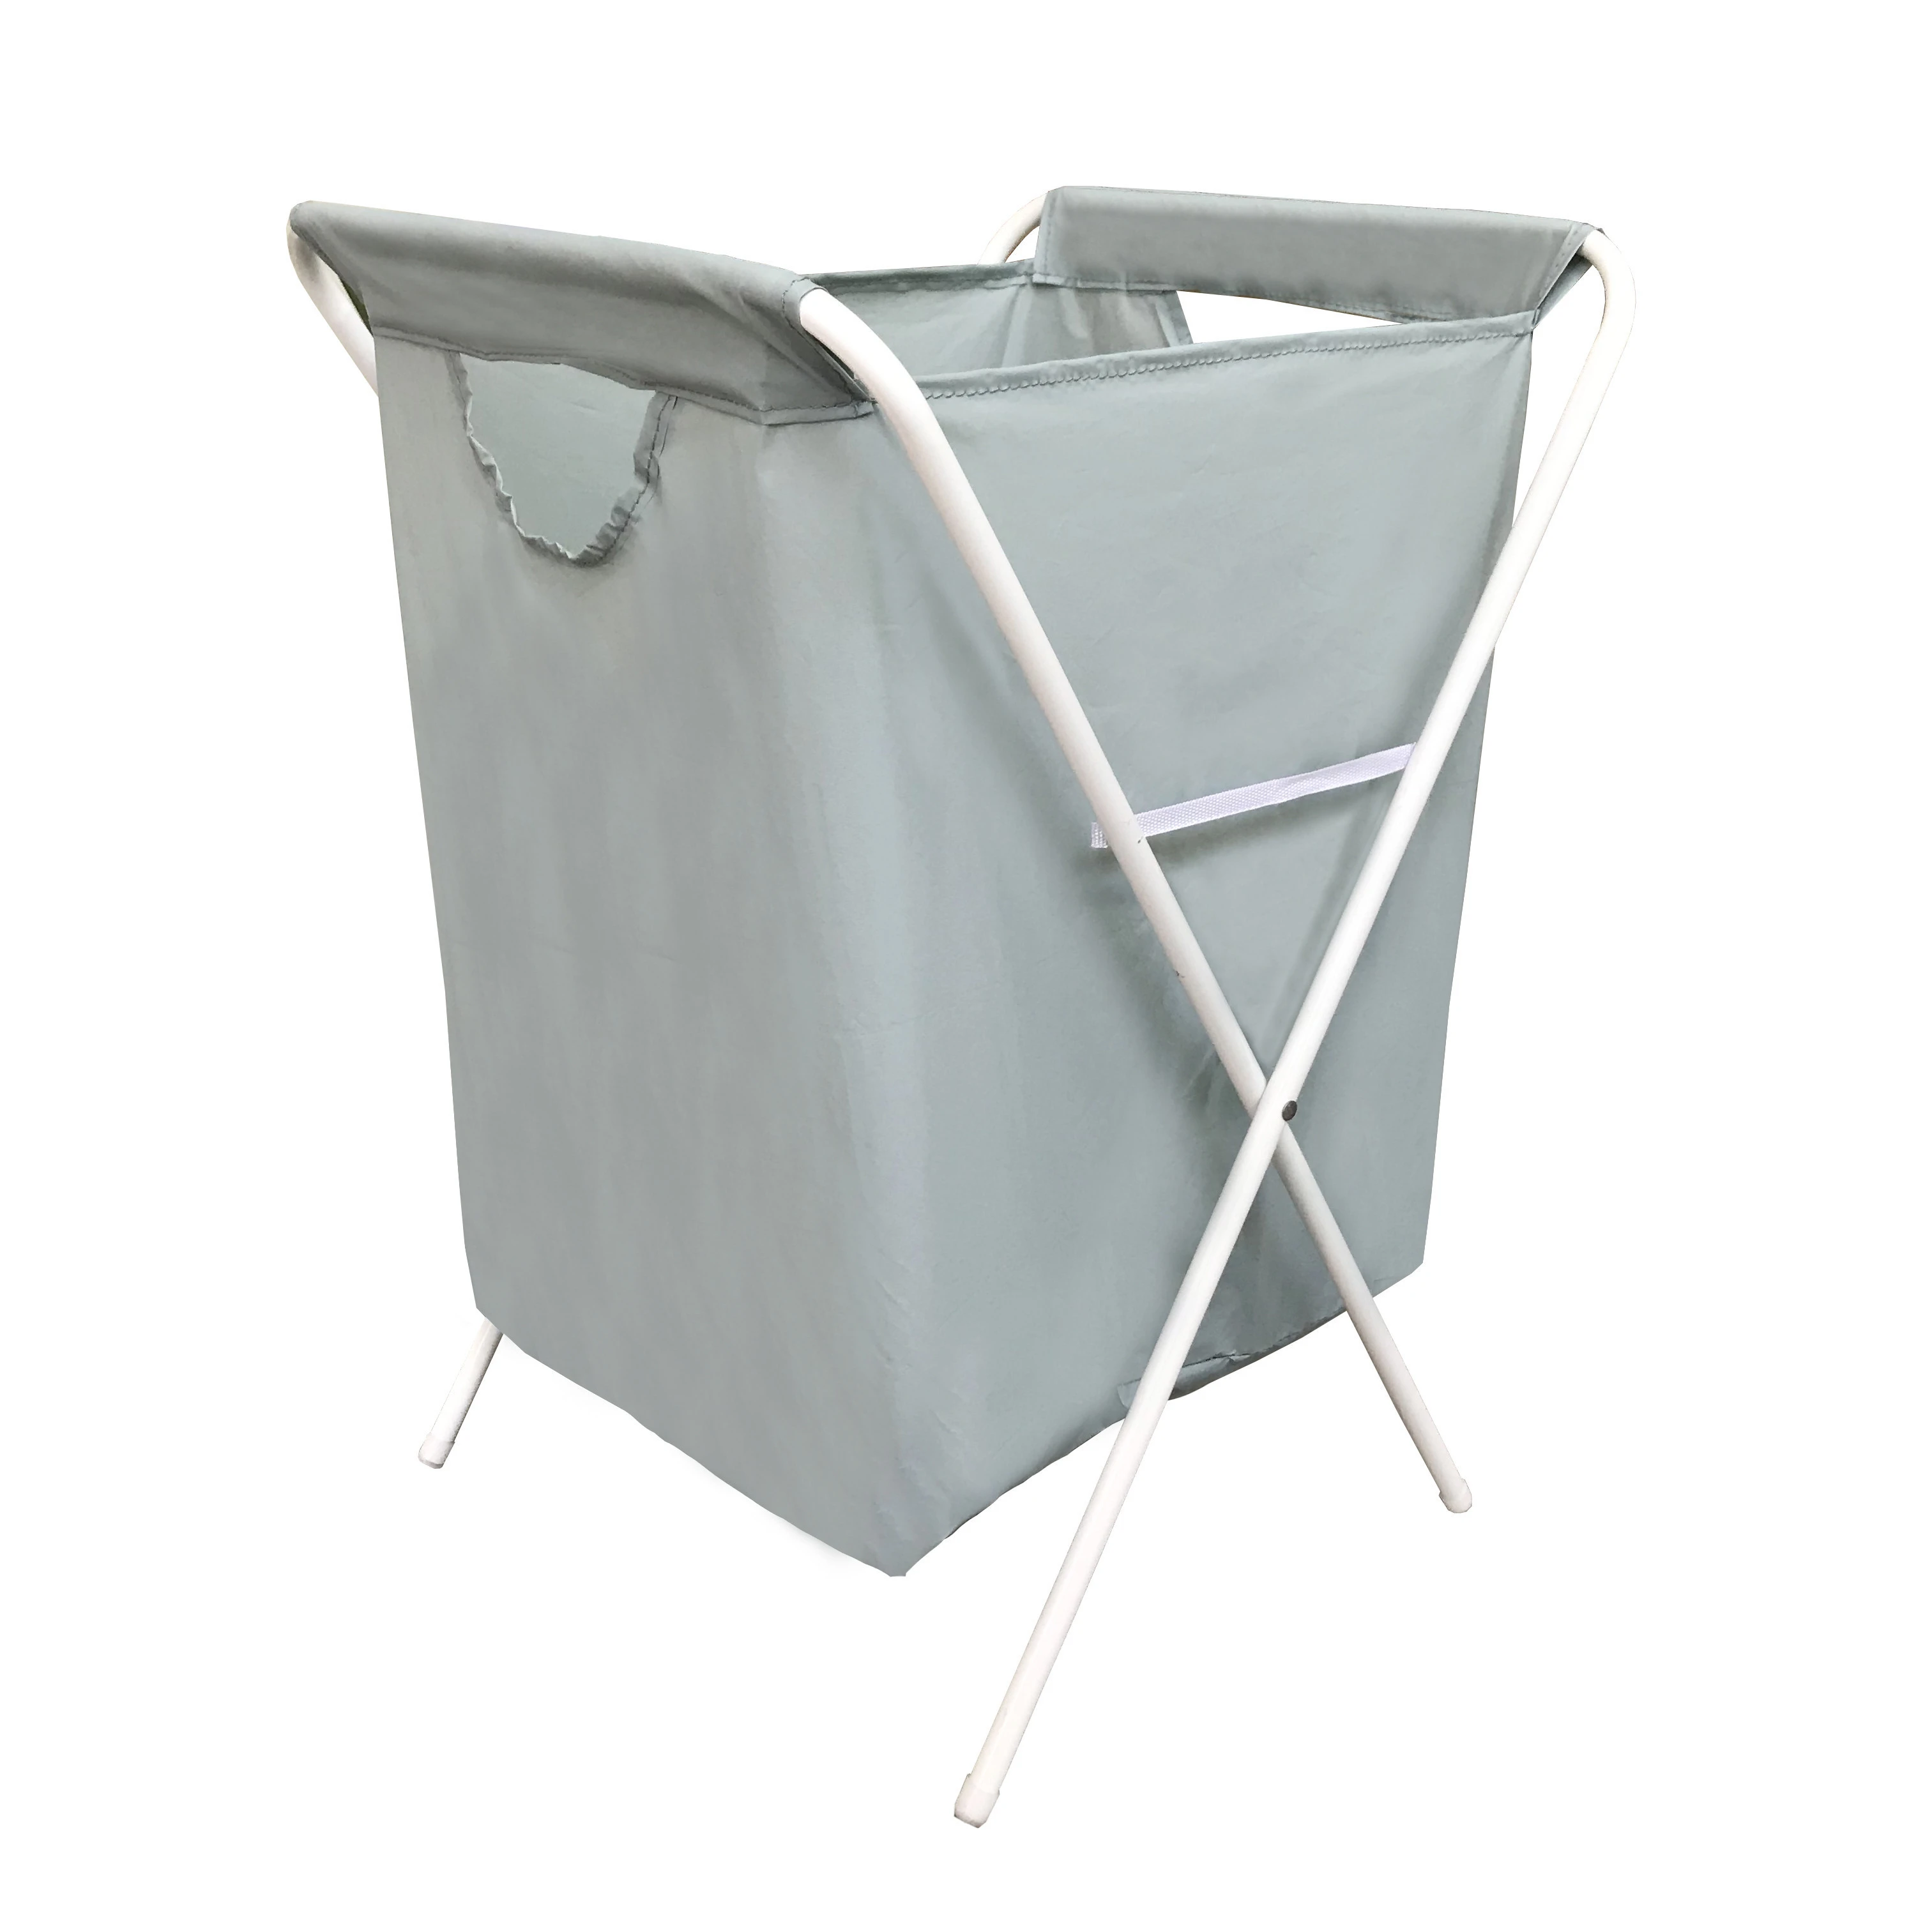 Furniture Storage Dirty Clothes Collapsible Peva Laundry Plastic Basket